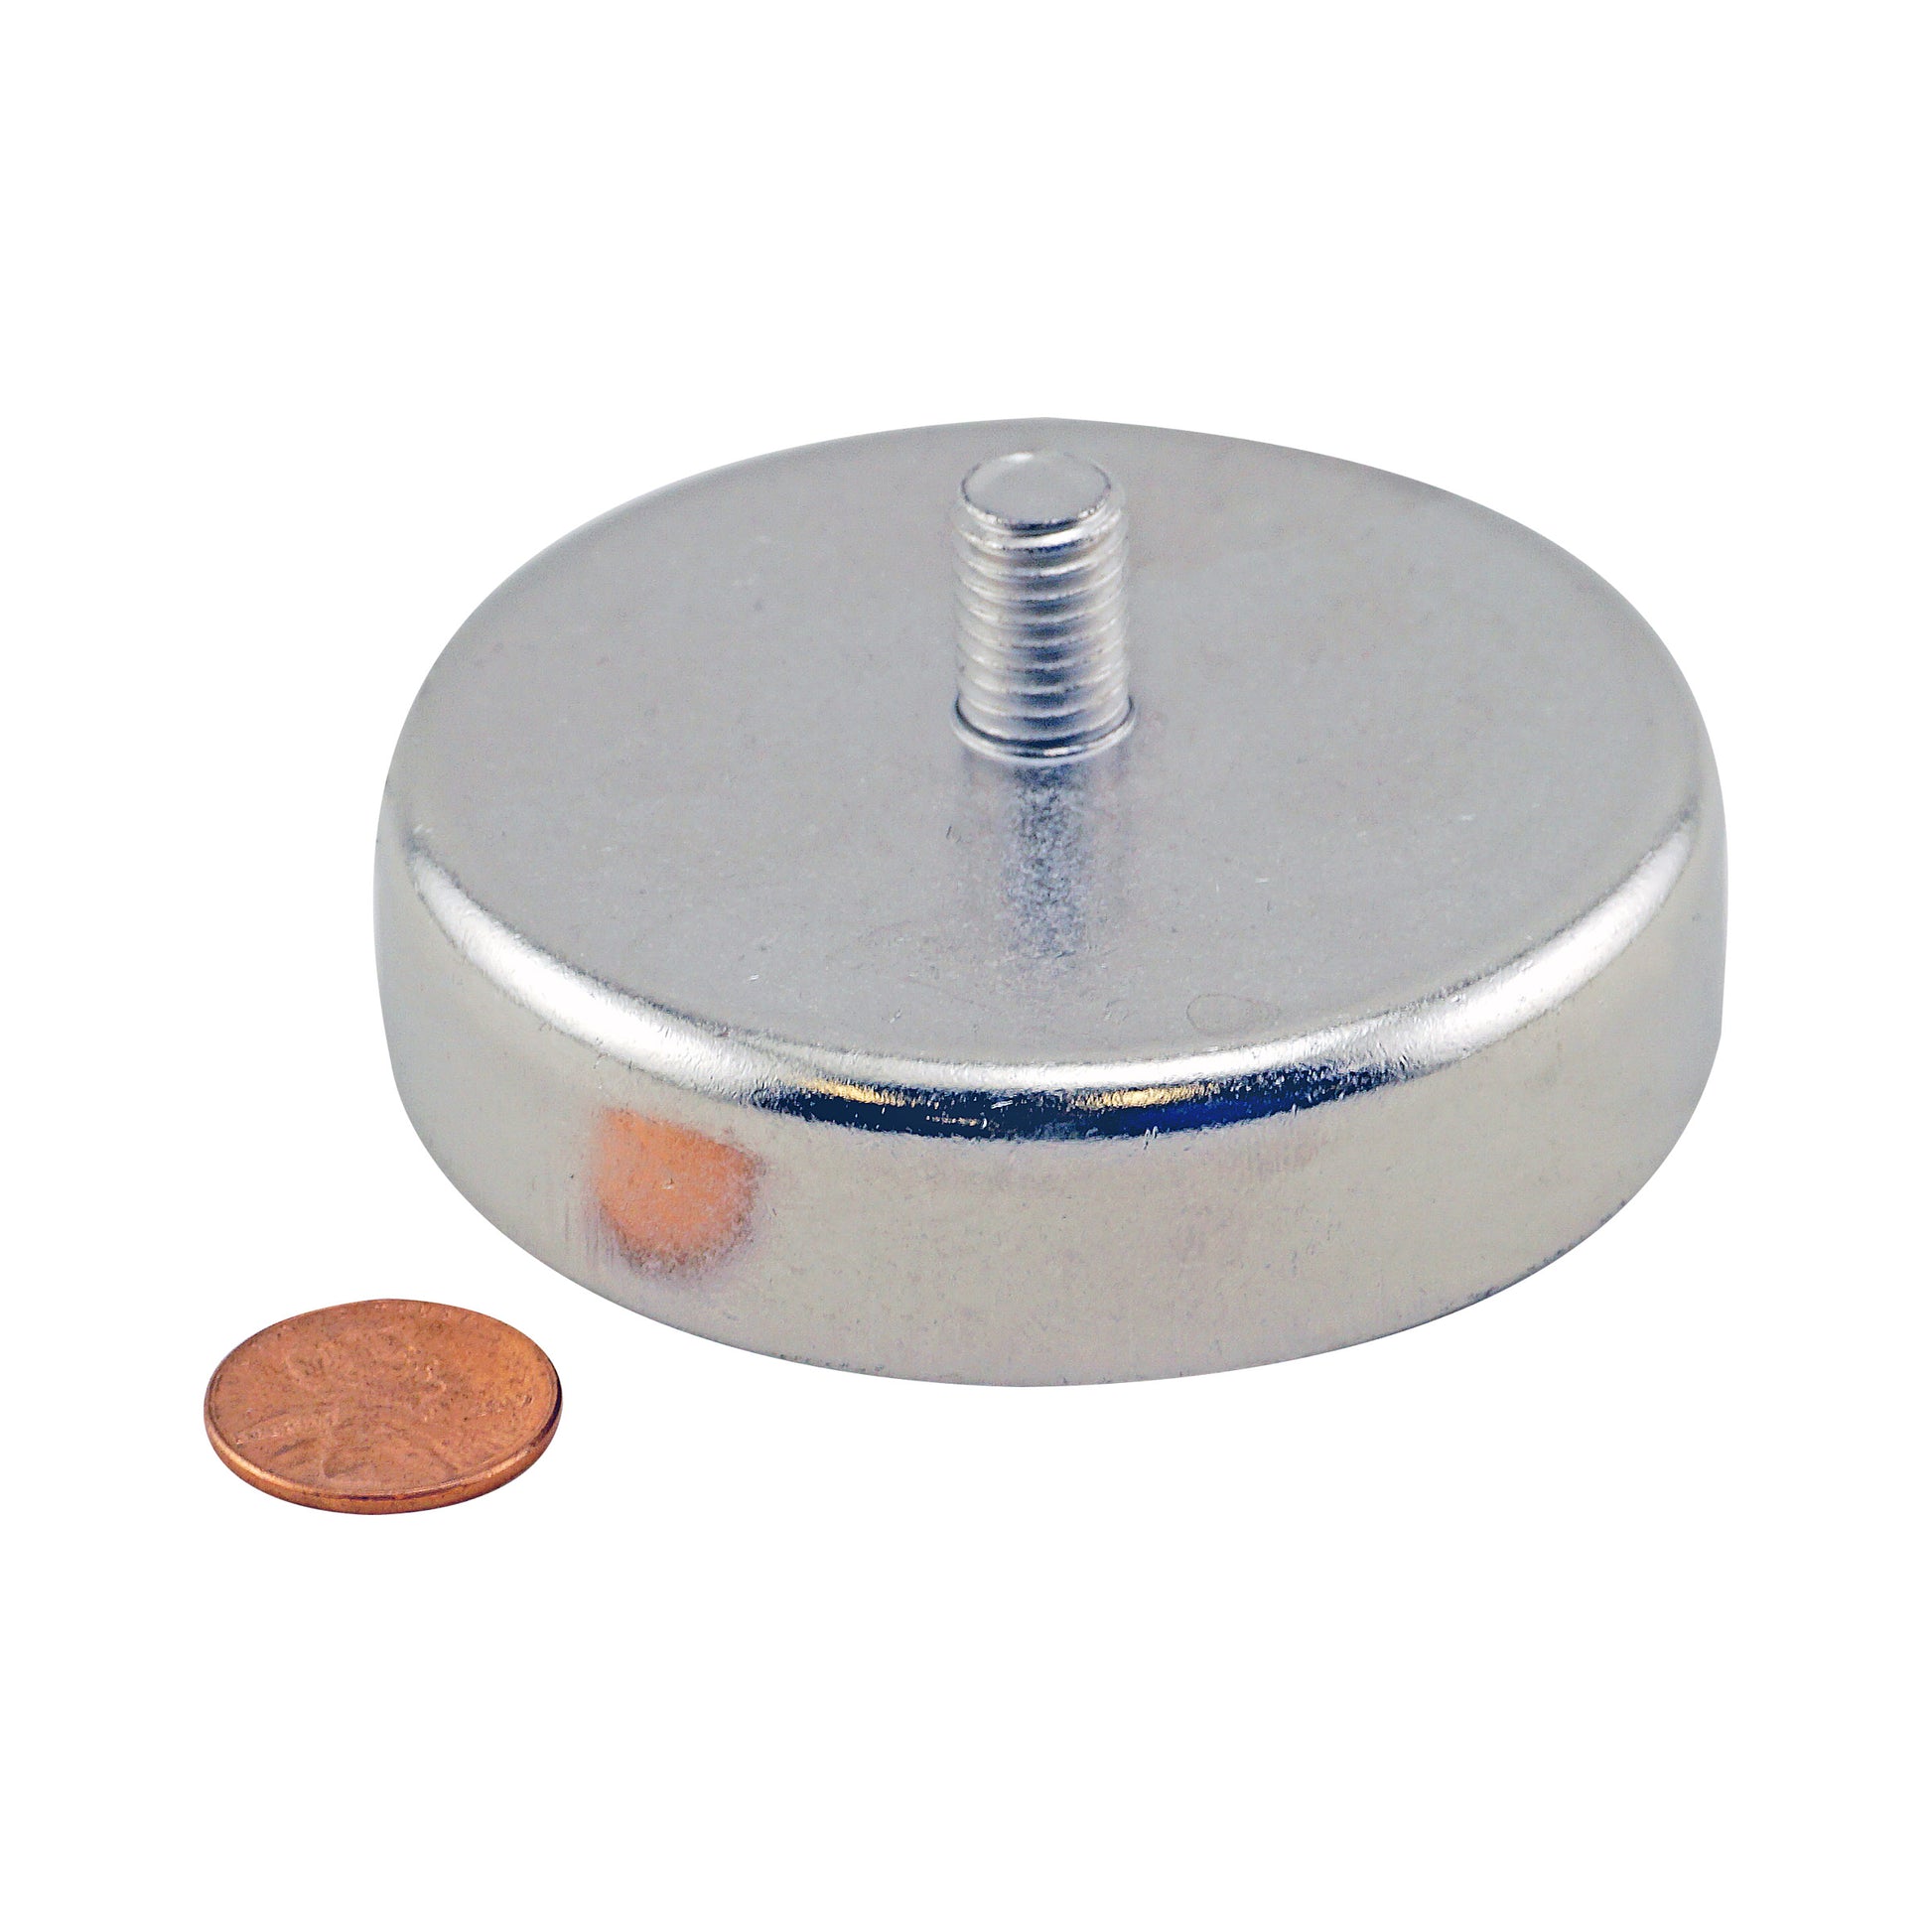 Load image into Gallery viewer, CACM300S01 Heavy-Duty Ceramic Round Base Magnet with Male Stud - Compared to Penny for Size Reference